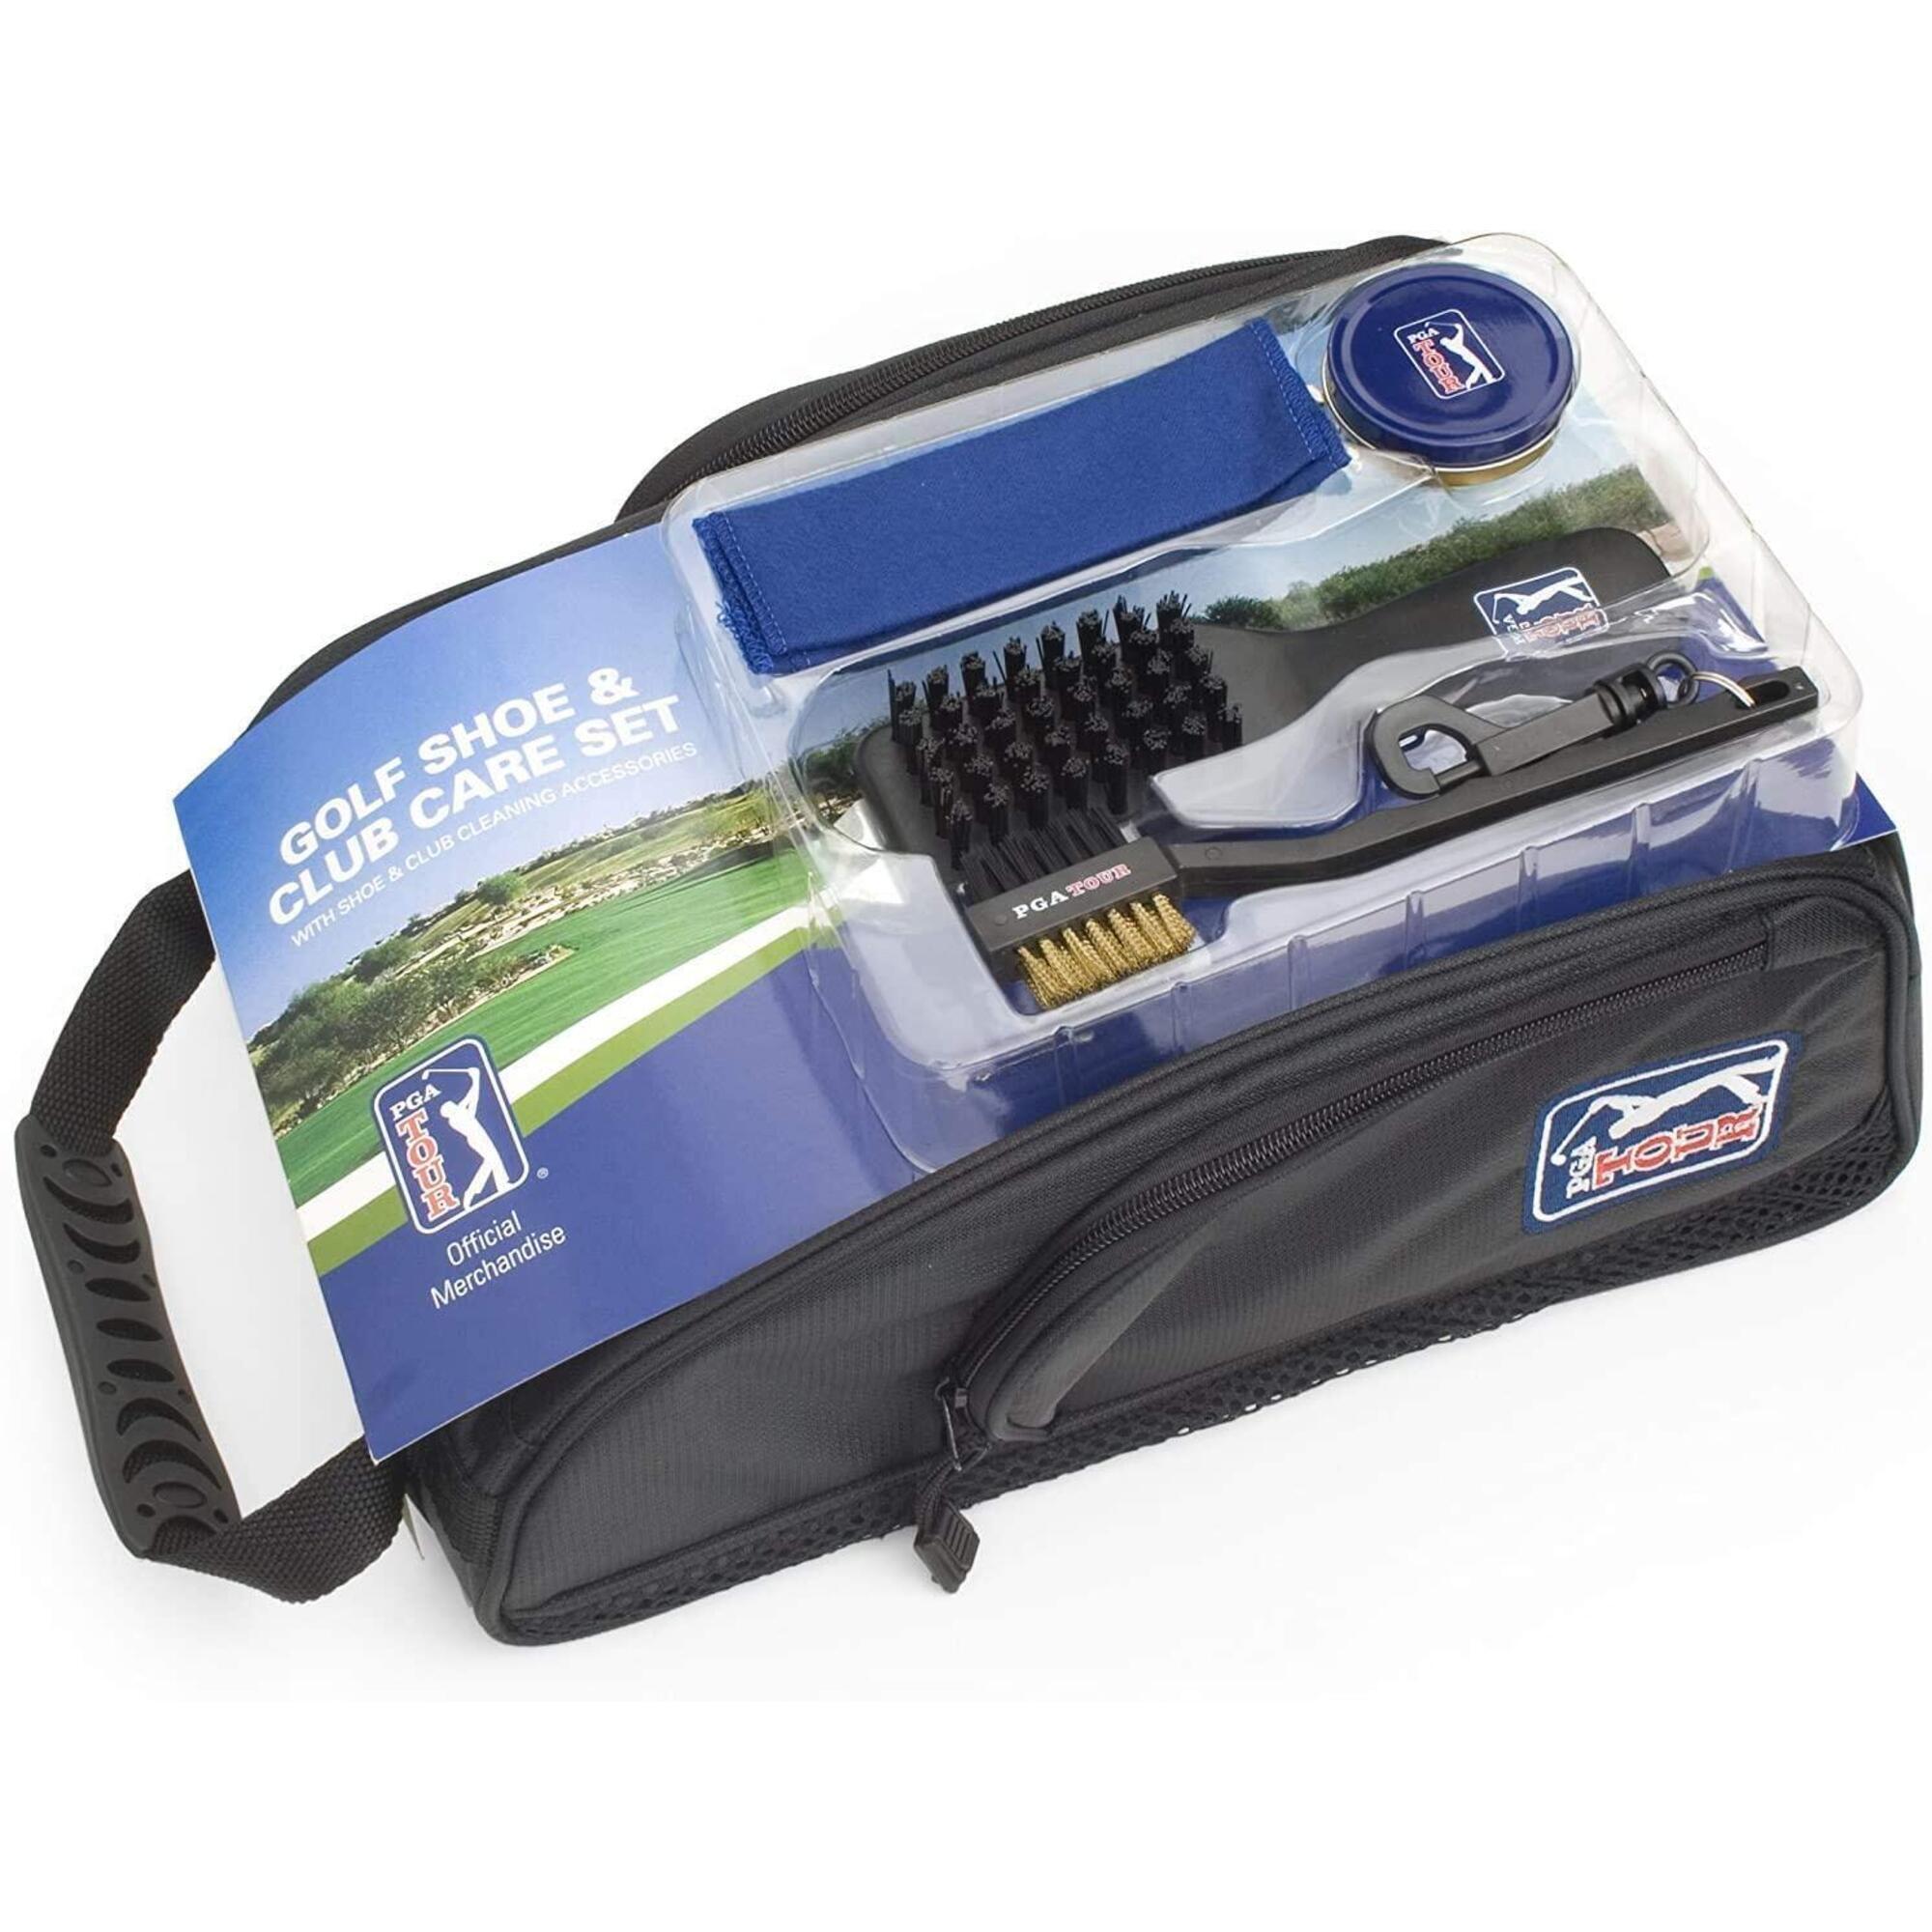 PGA Tour Shoe Bag With Club Cleaning Set 1/5